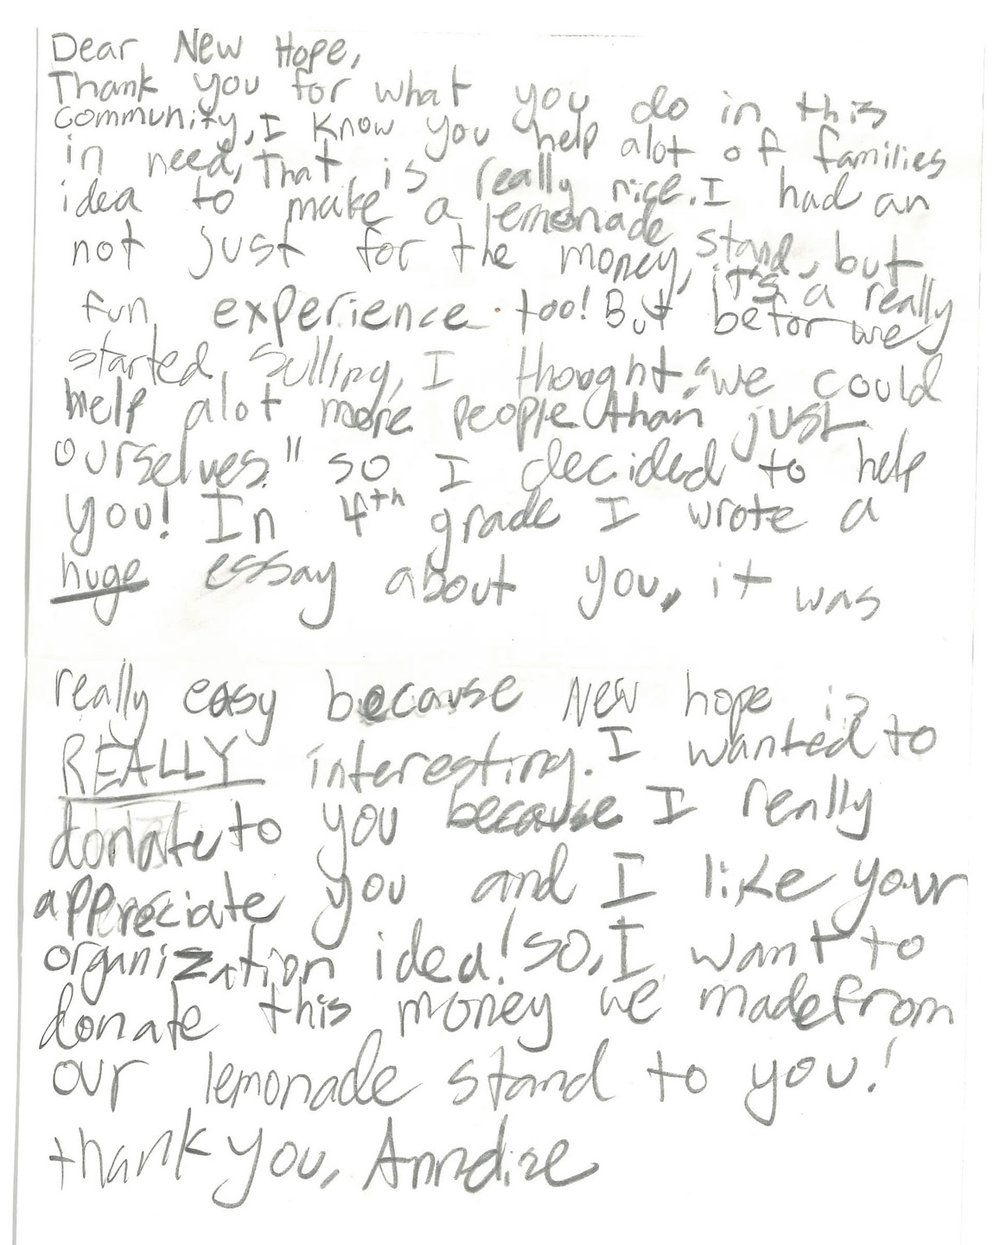  The letter that accompanied the donation from Annelise to New Hope. In part, it reads, “I wanted to donate to you because I really appreciate you and I like your organization idea! So, I want to donate this money we made from our lemonade stand to y